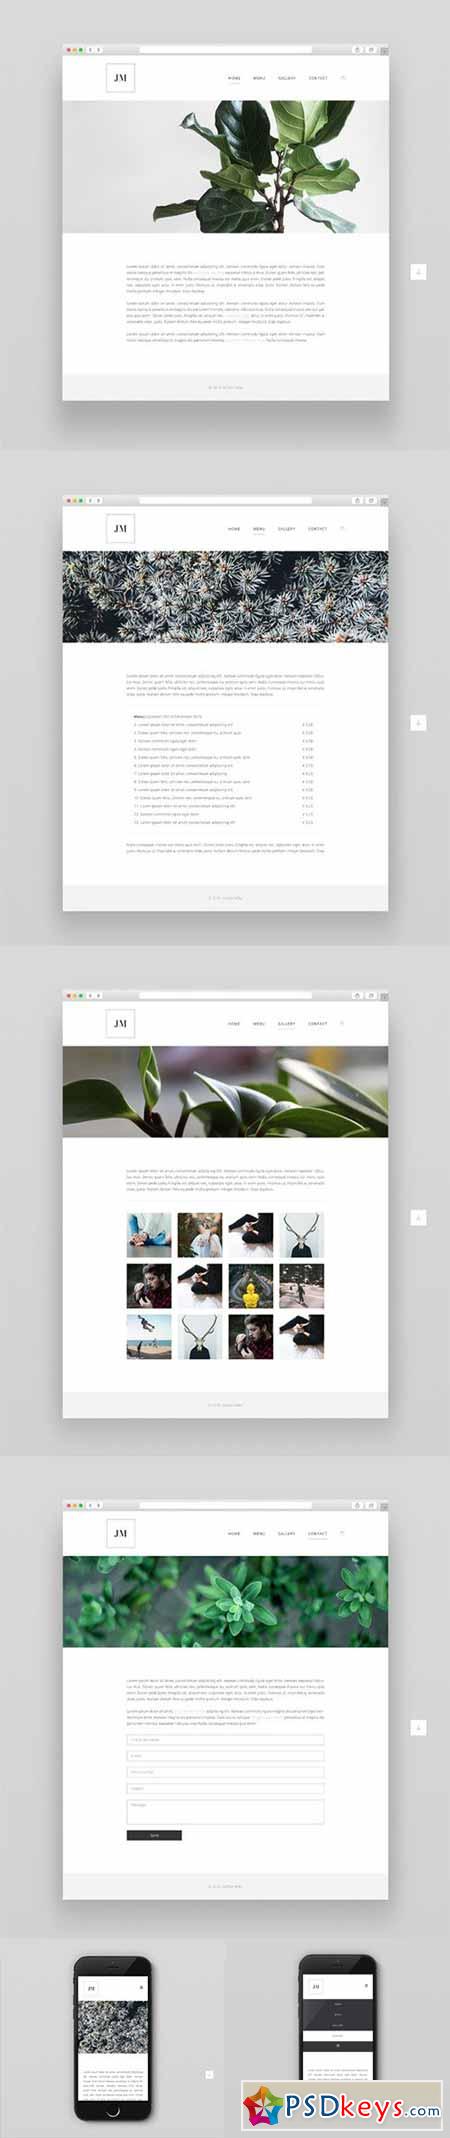 Complete Website Theme, HTML CSS PSD 531499